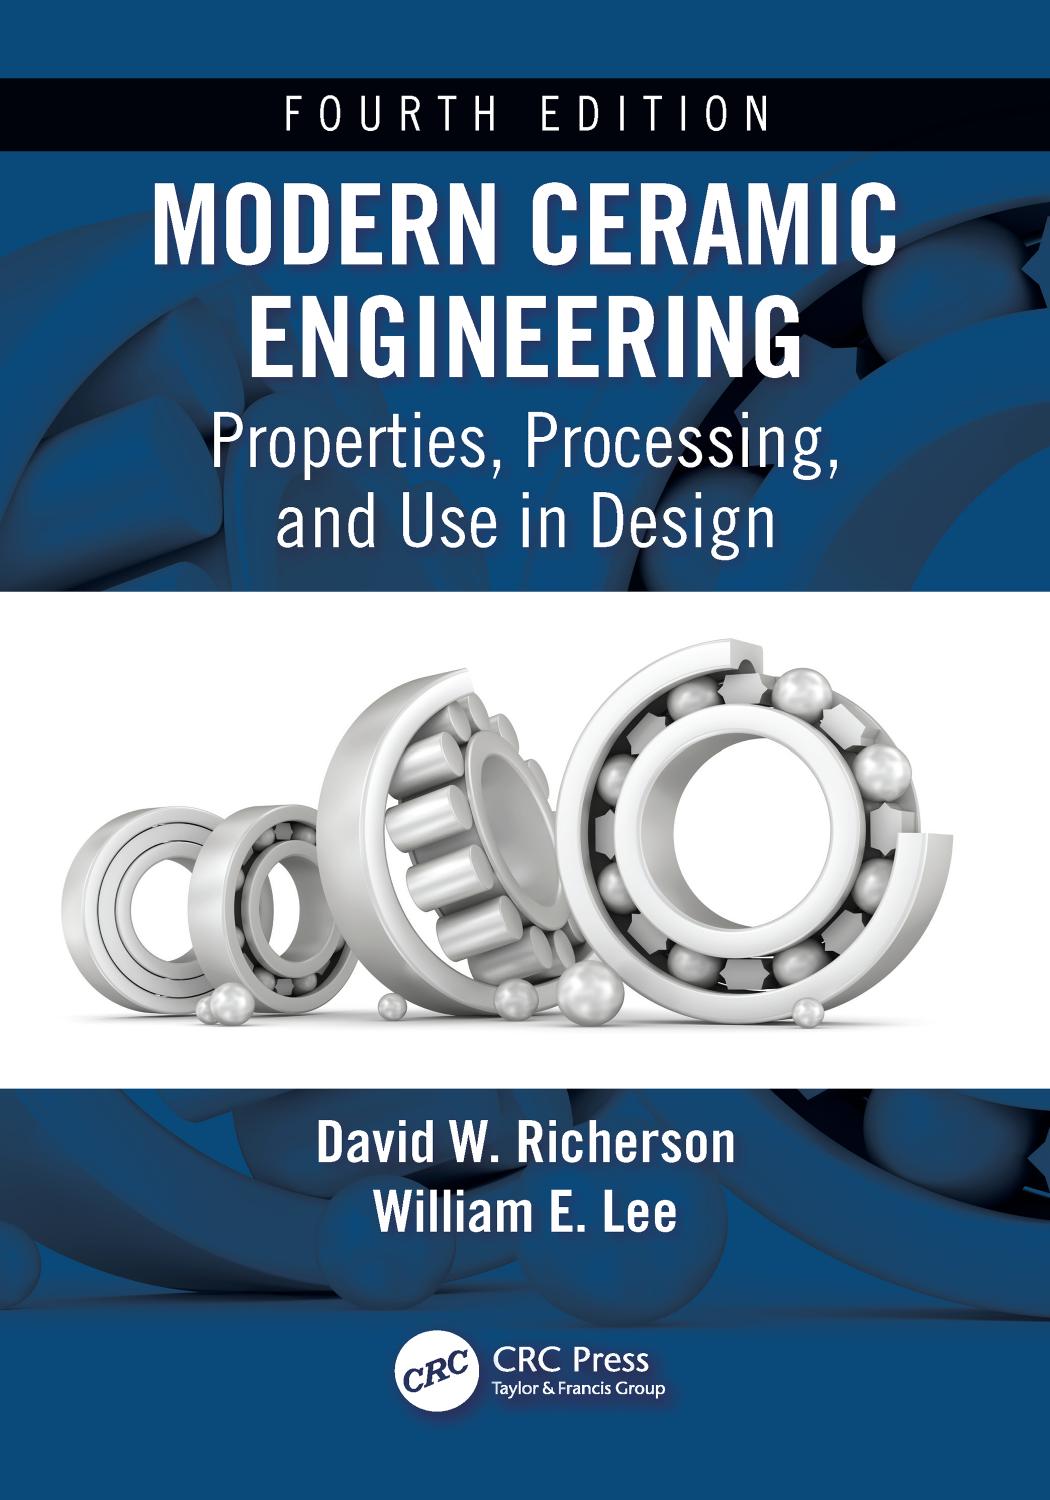 Modern Ceramic Engineering: Properties, Processing, and Use in Design